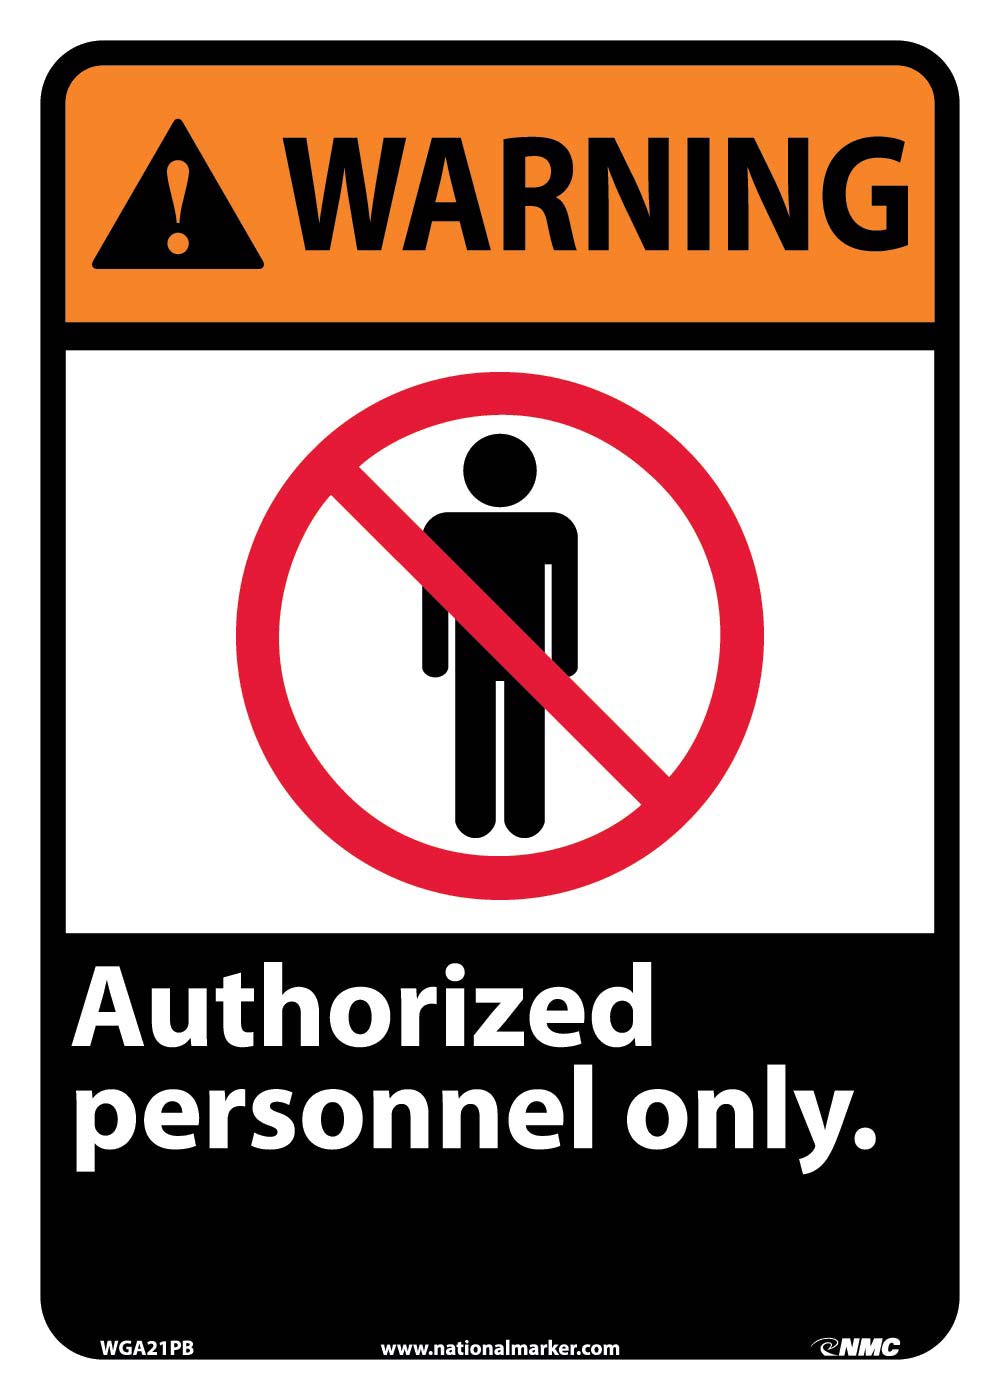 Warning Authorized Personnel Only Sign-eSafety Supplies, Inc